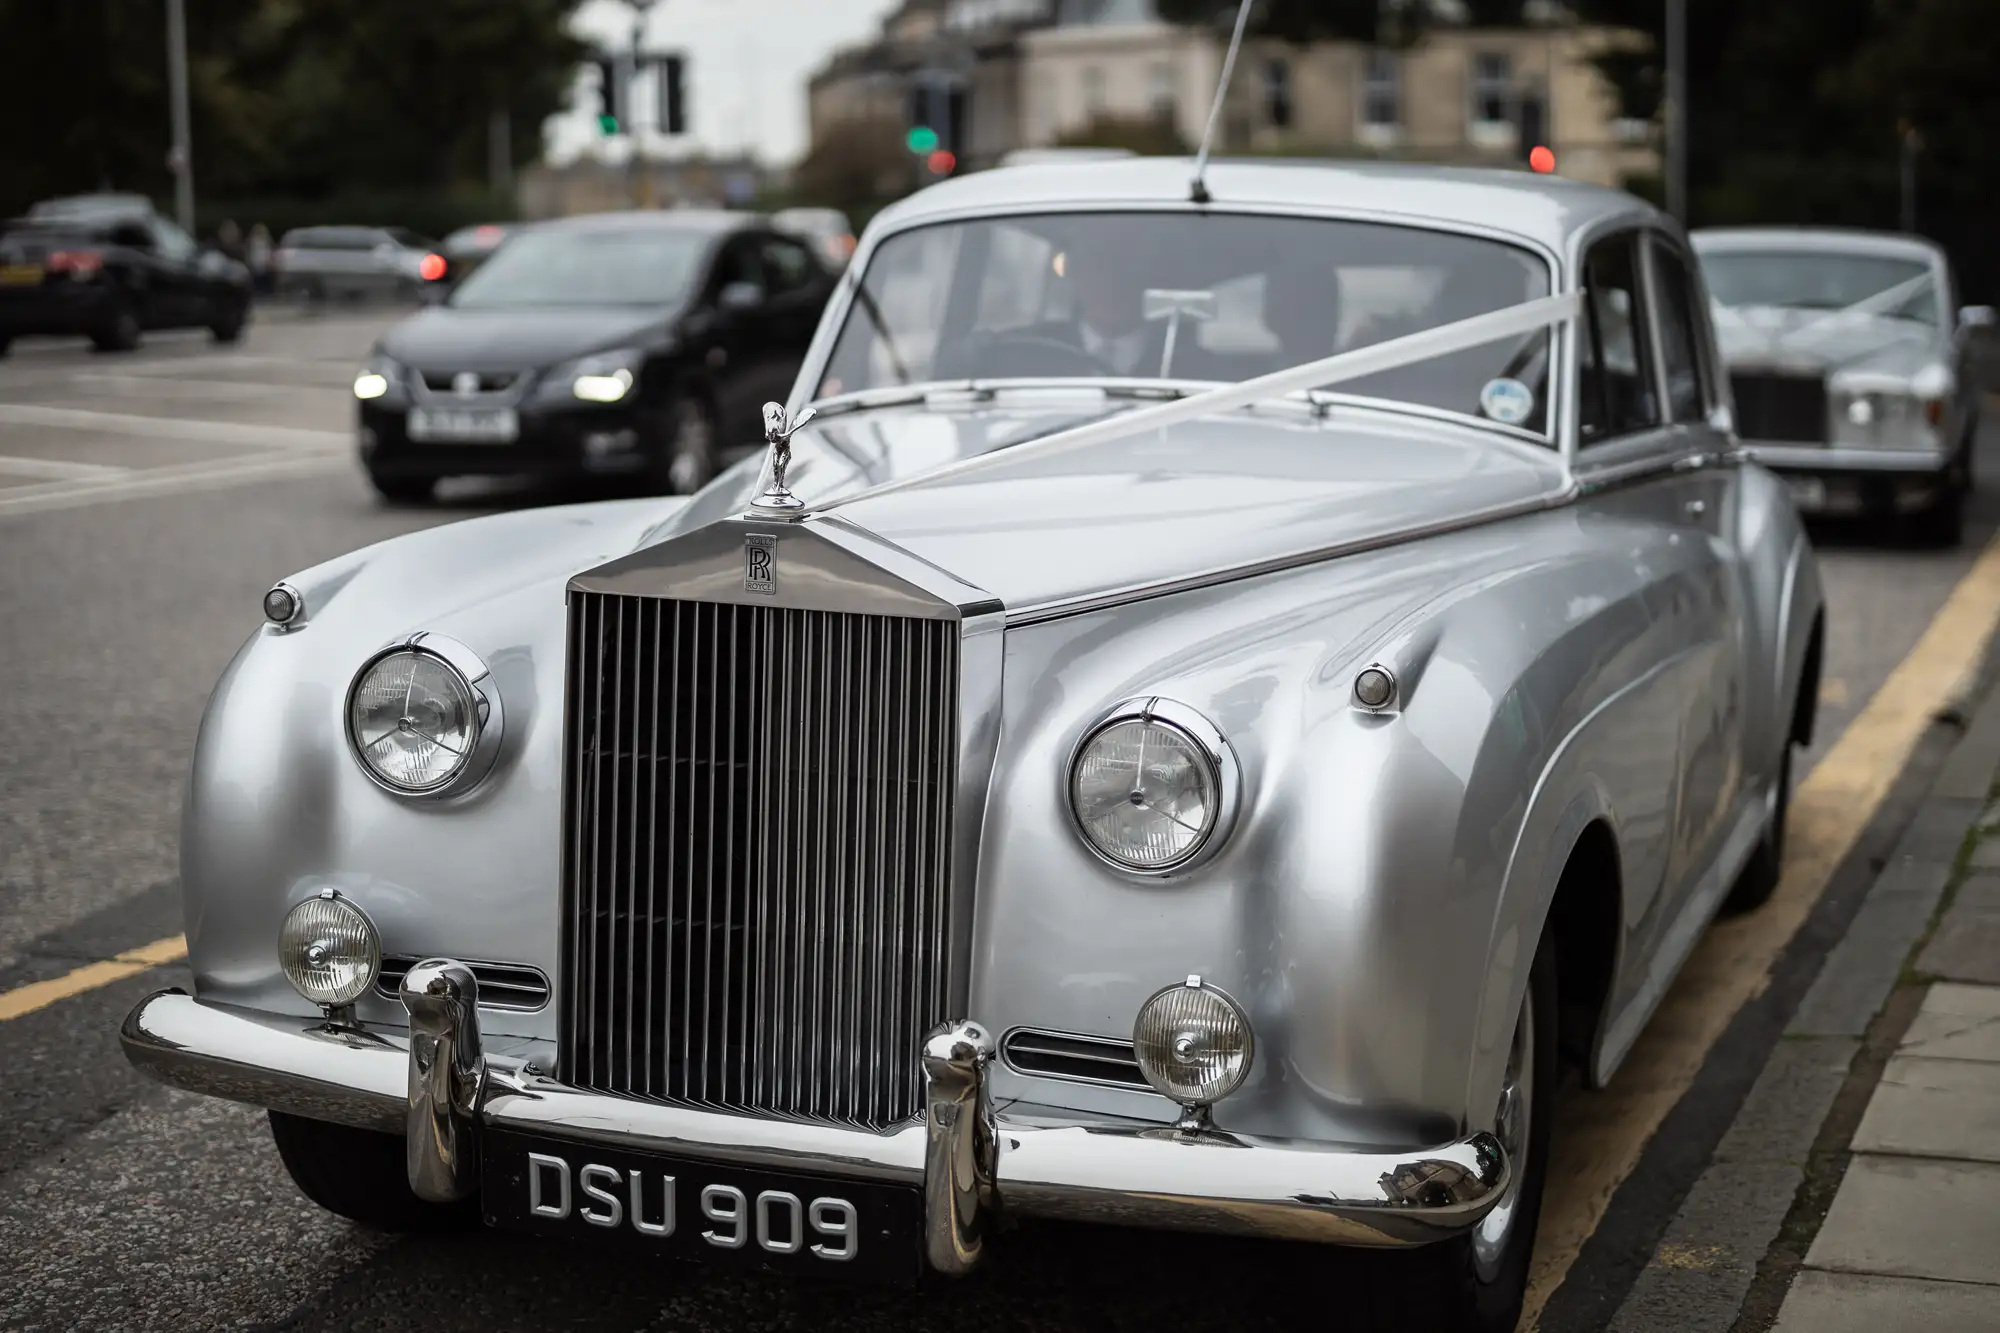 A vintage silver rolls-royce parked on a city street, with modern cars in the background.